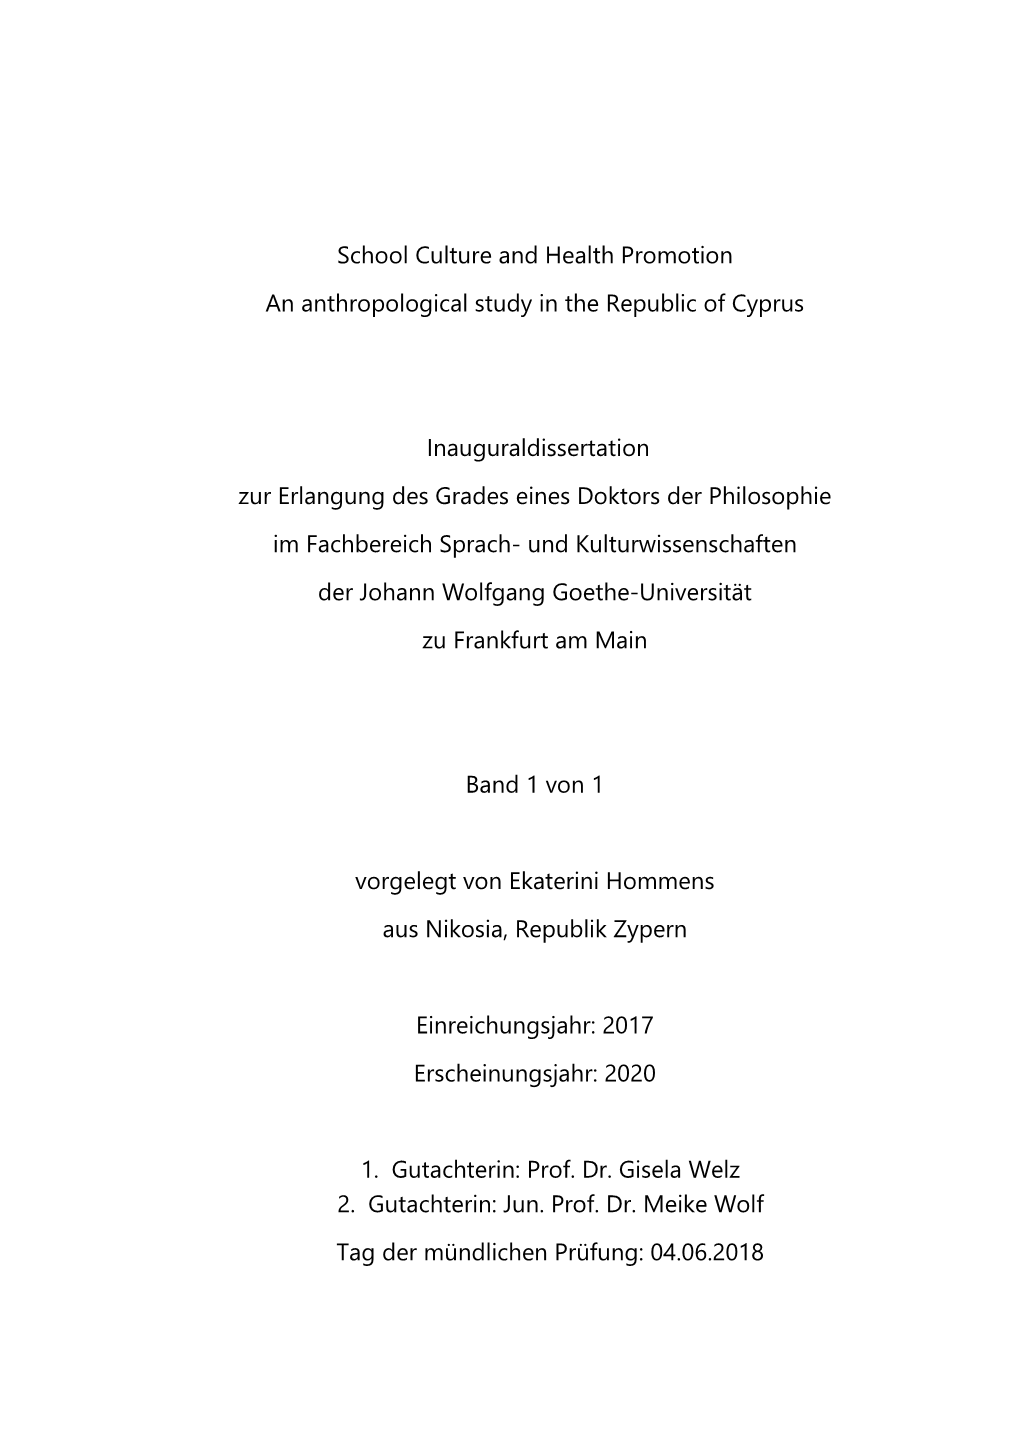 School Culture and Health Promotion an Anthropological Study in the Republic of Cyprus